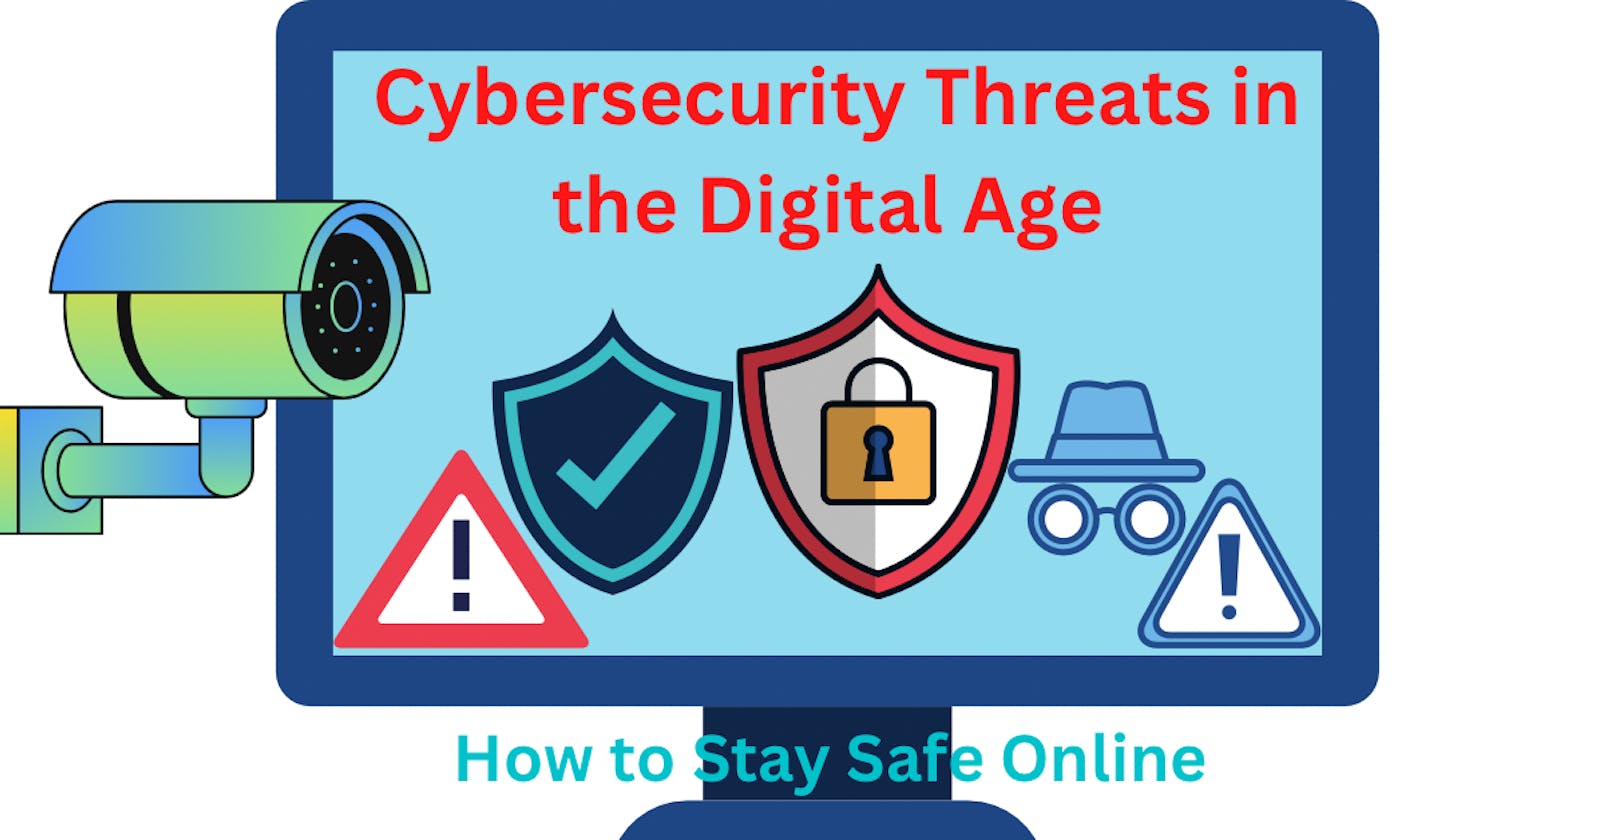 Cybersecurity Threats in the Digital Age: How to Stay Safe Online